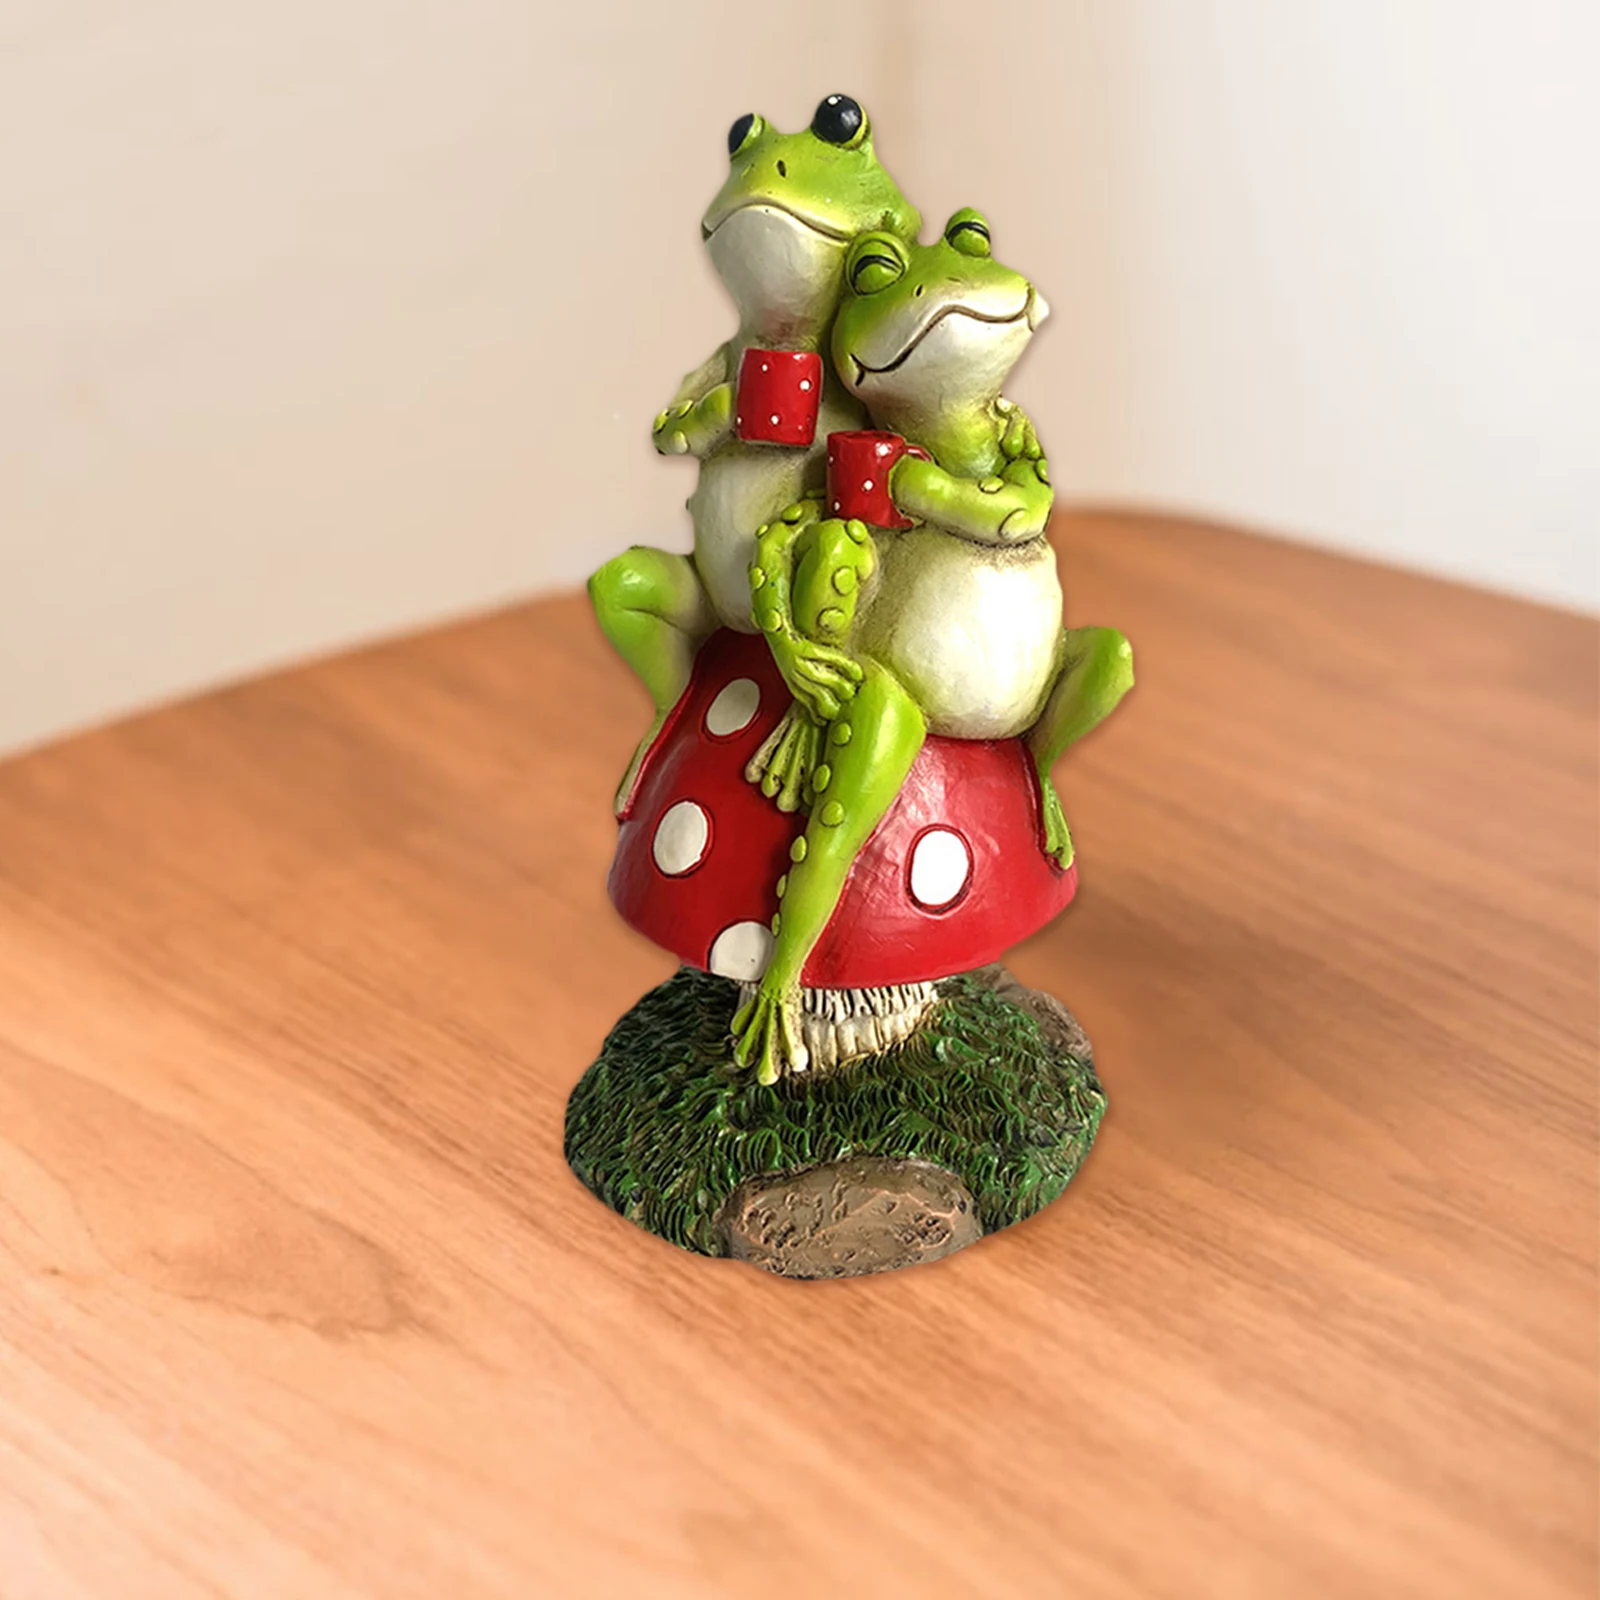 Resin Couple Frog Figurines Outdoor Animal Statue Yard Garden Decoration Ornament Flower Bed Modern Decorative Crafts